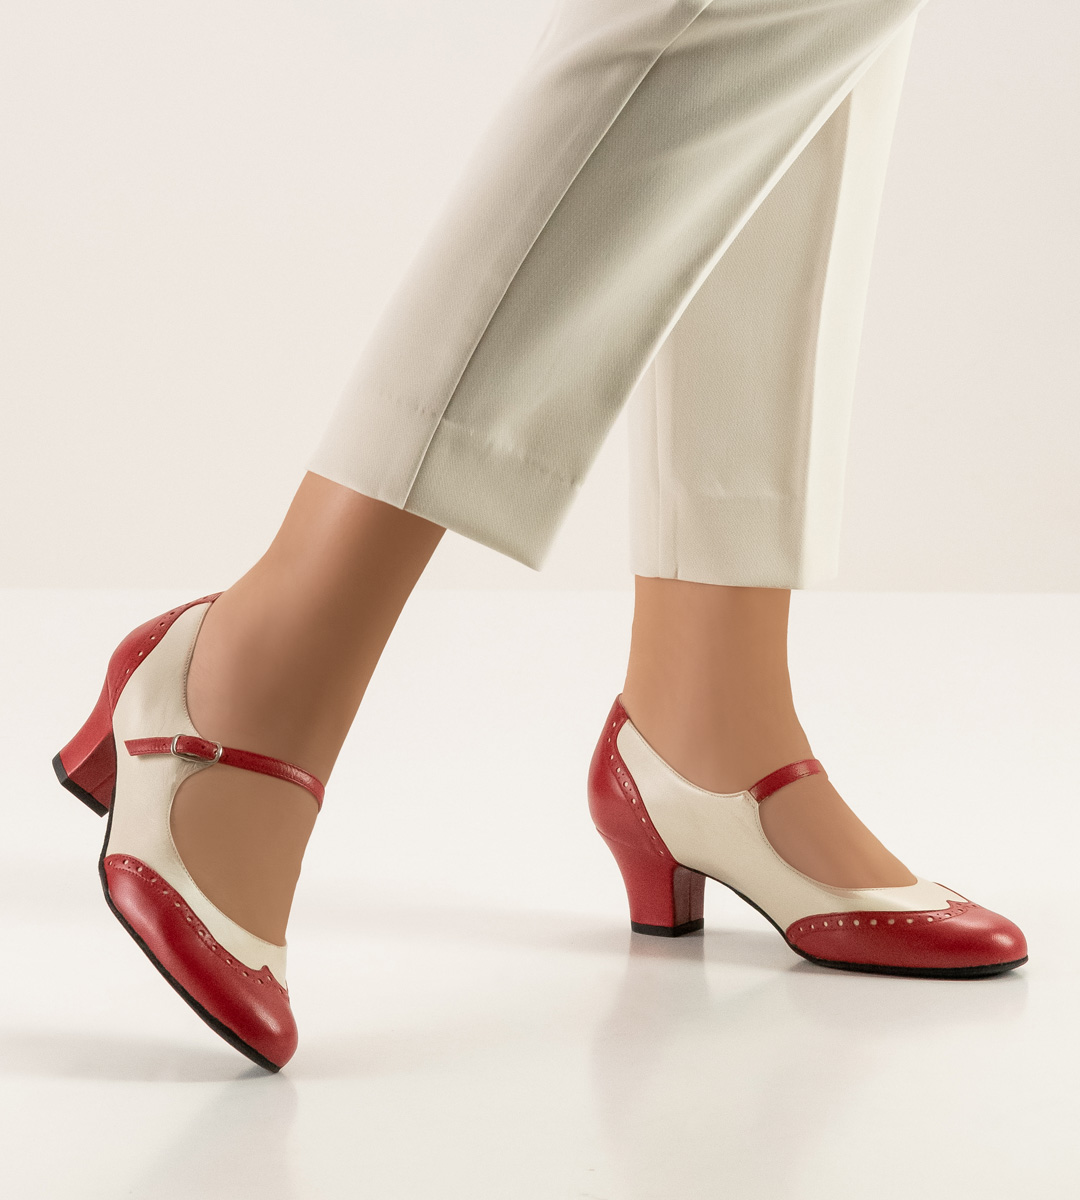 Women's closed dance shoe from Werner Kern with buckle